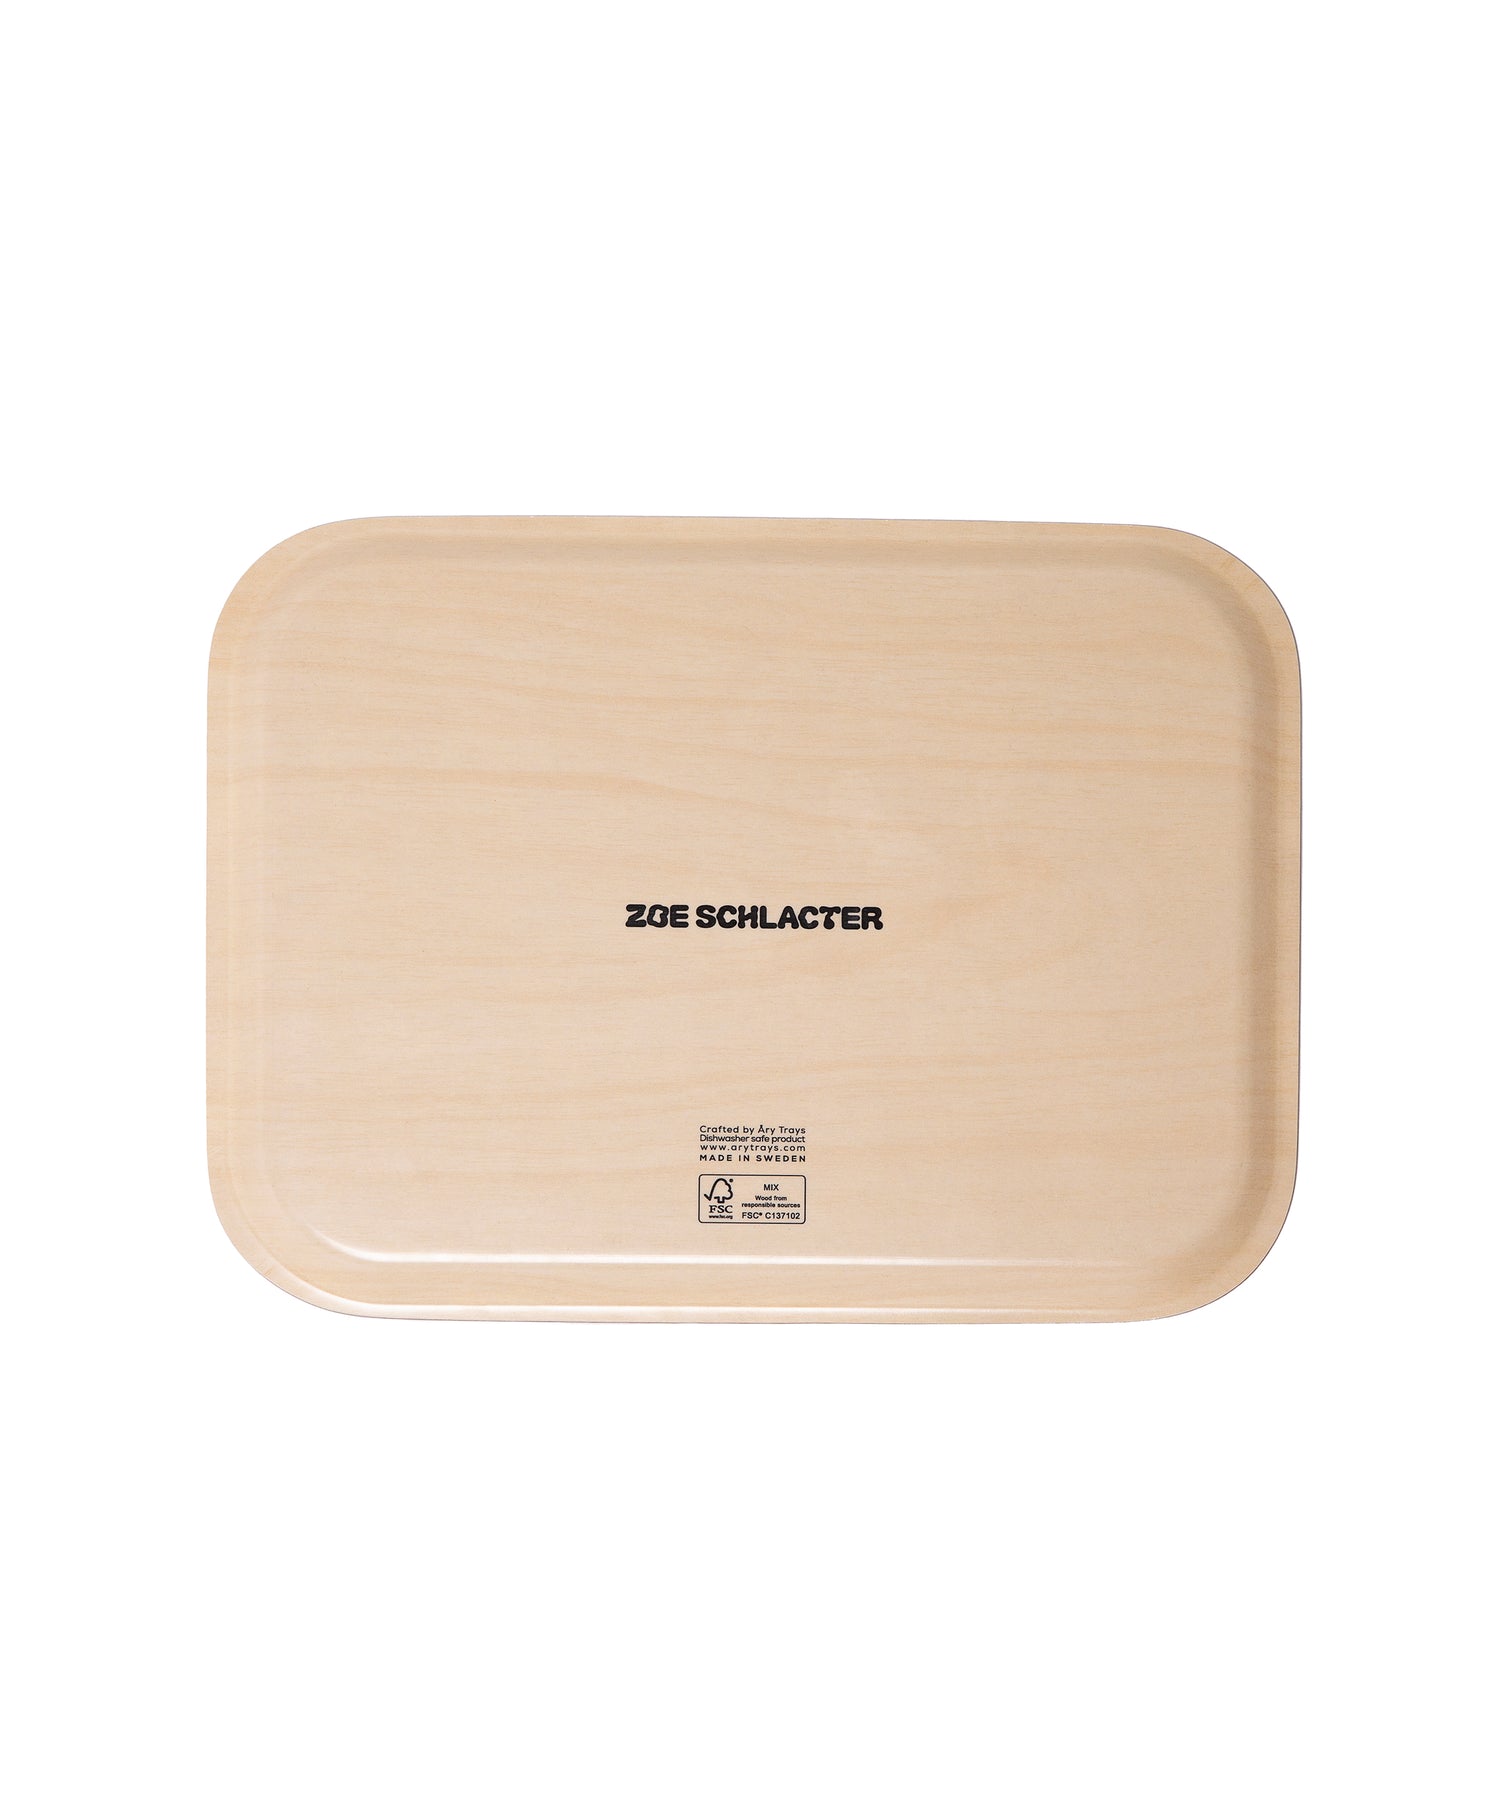 Detail of the back of the Dazzle Tray showing the light tan birch color with the Zoe Schlacter logo centered.